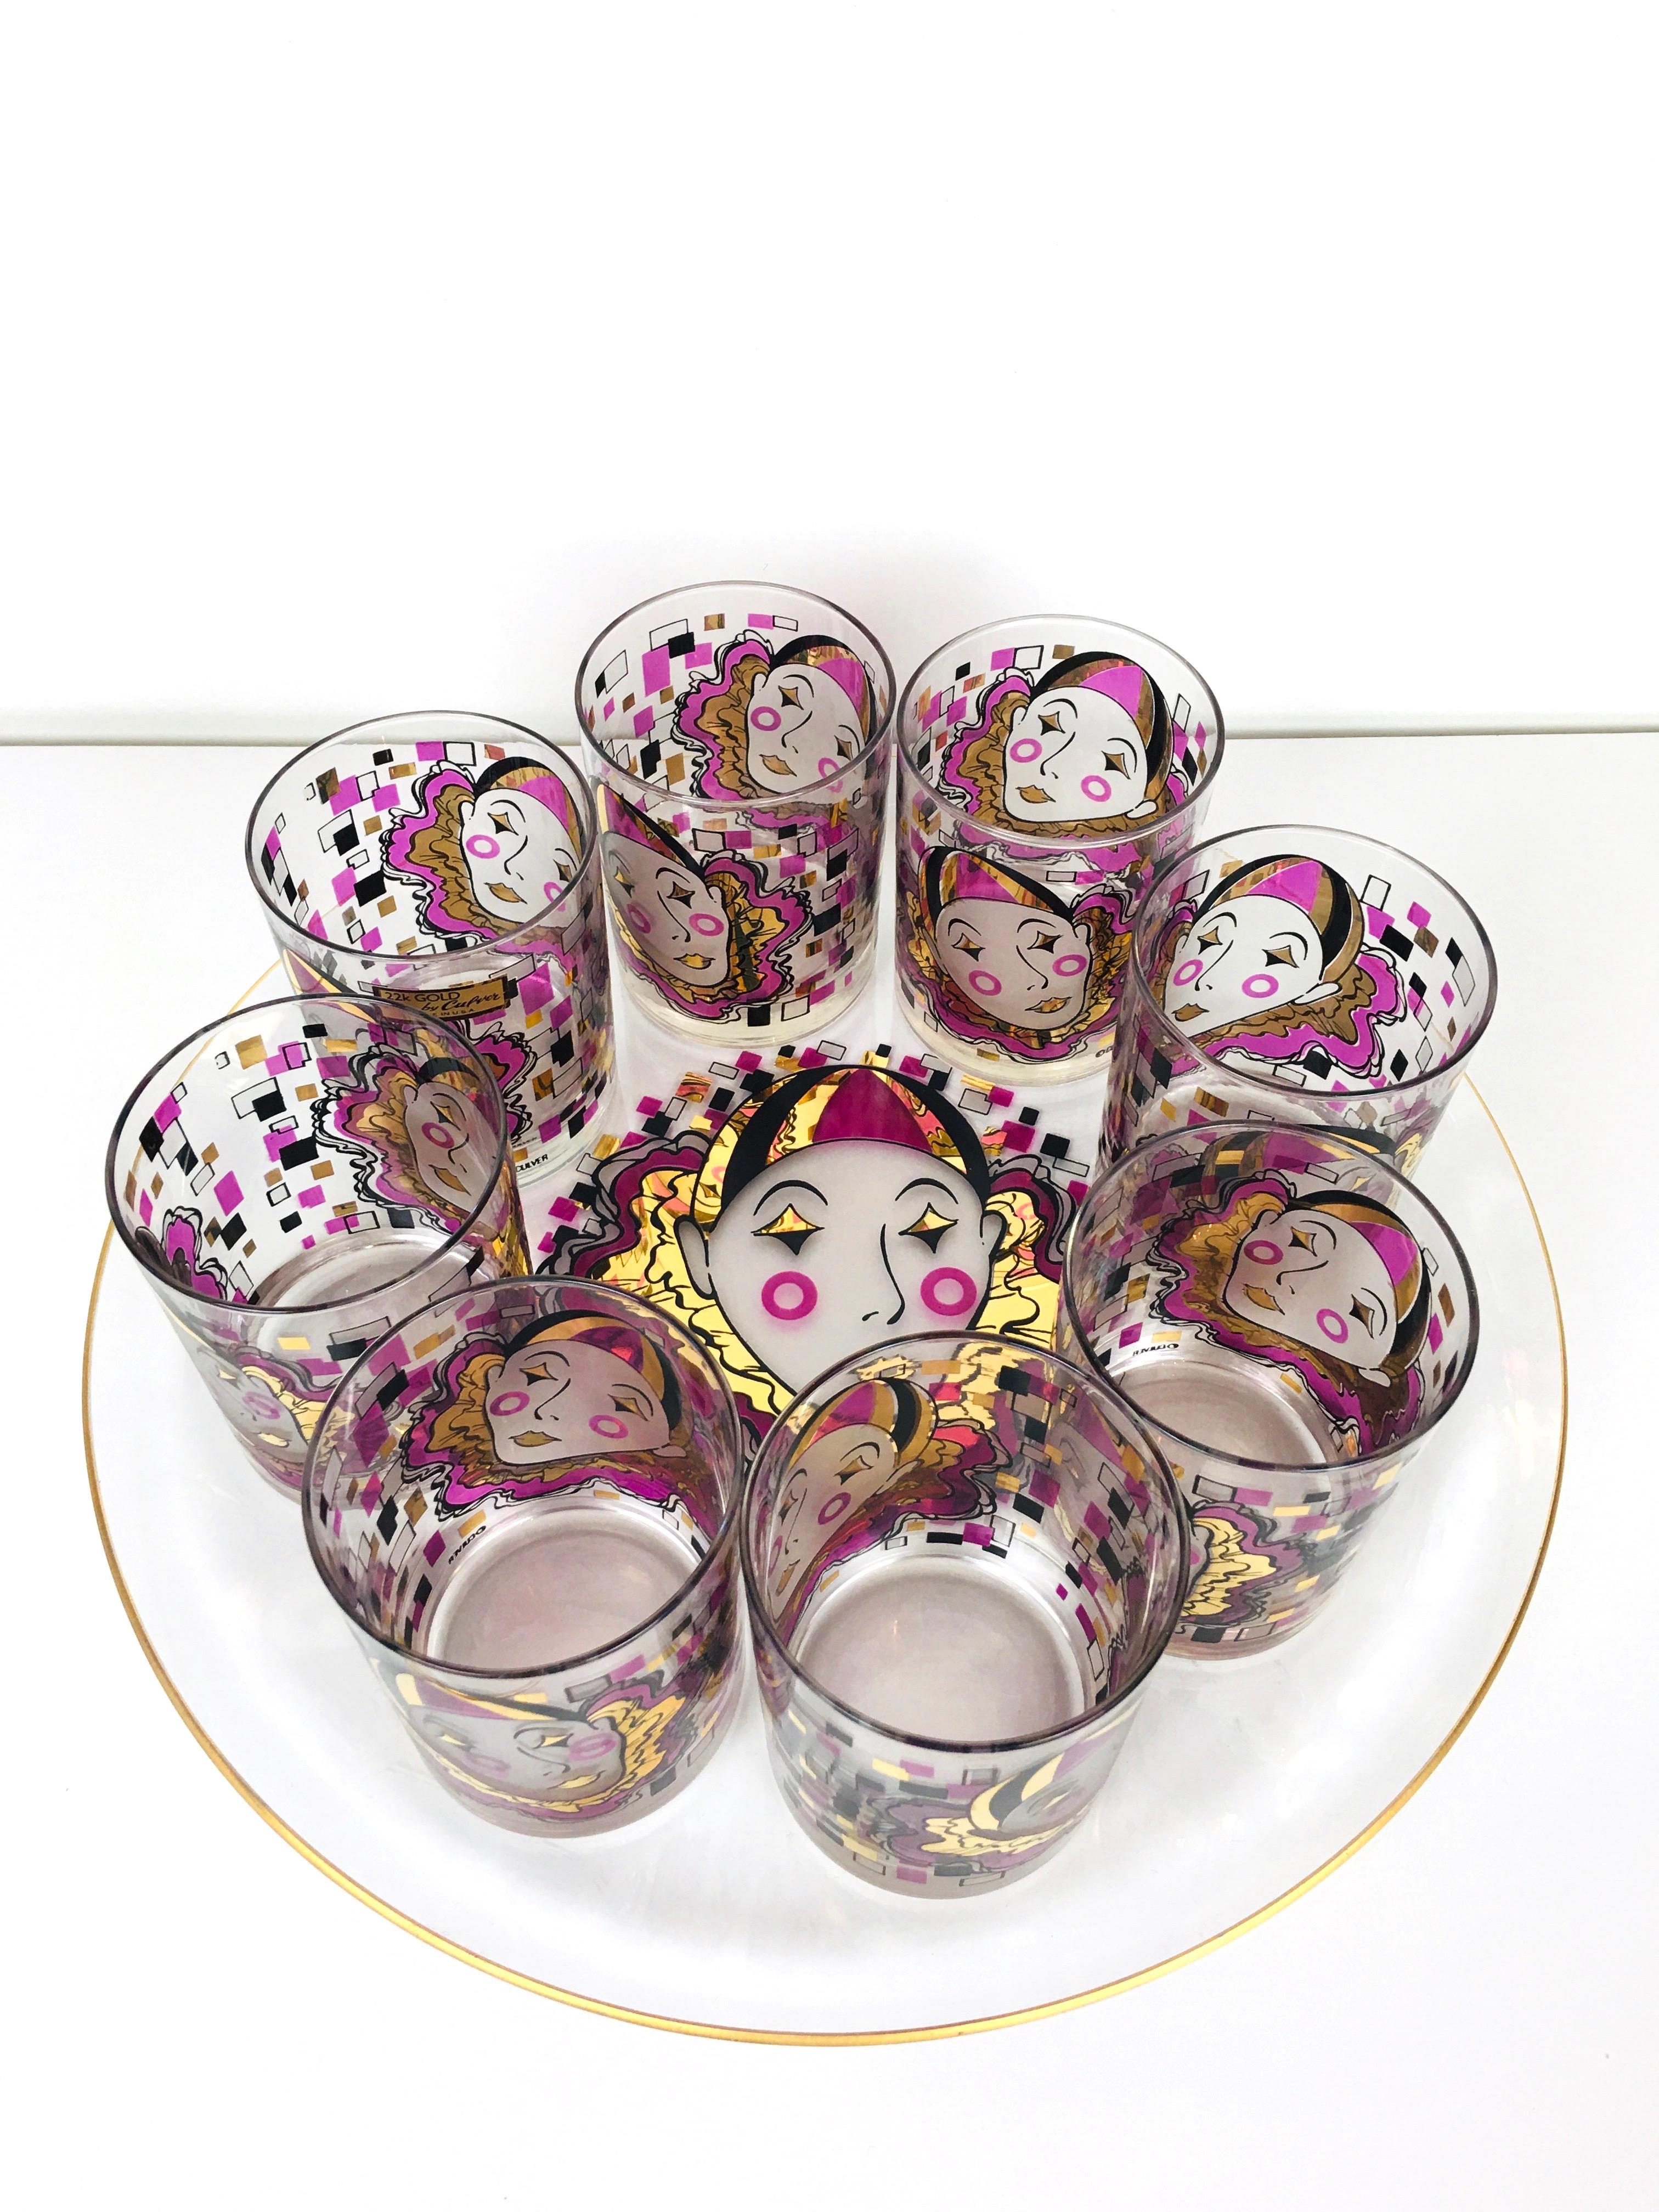 1980s 22K Culver Clown 8 Vintage Barware Cocktail Glasses and Serving Tray Set For Sale 3